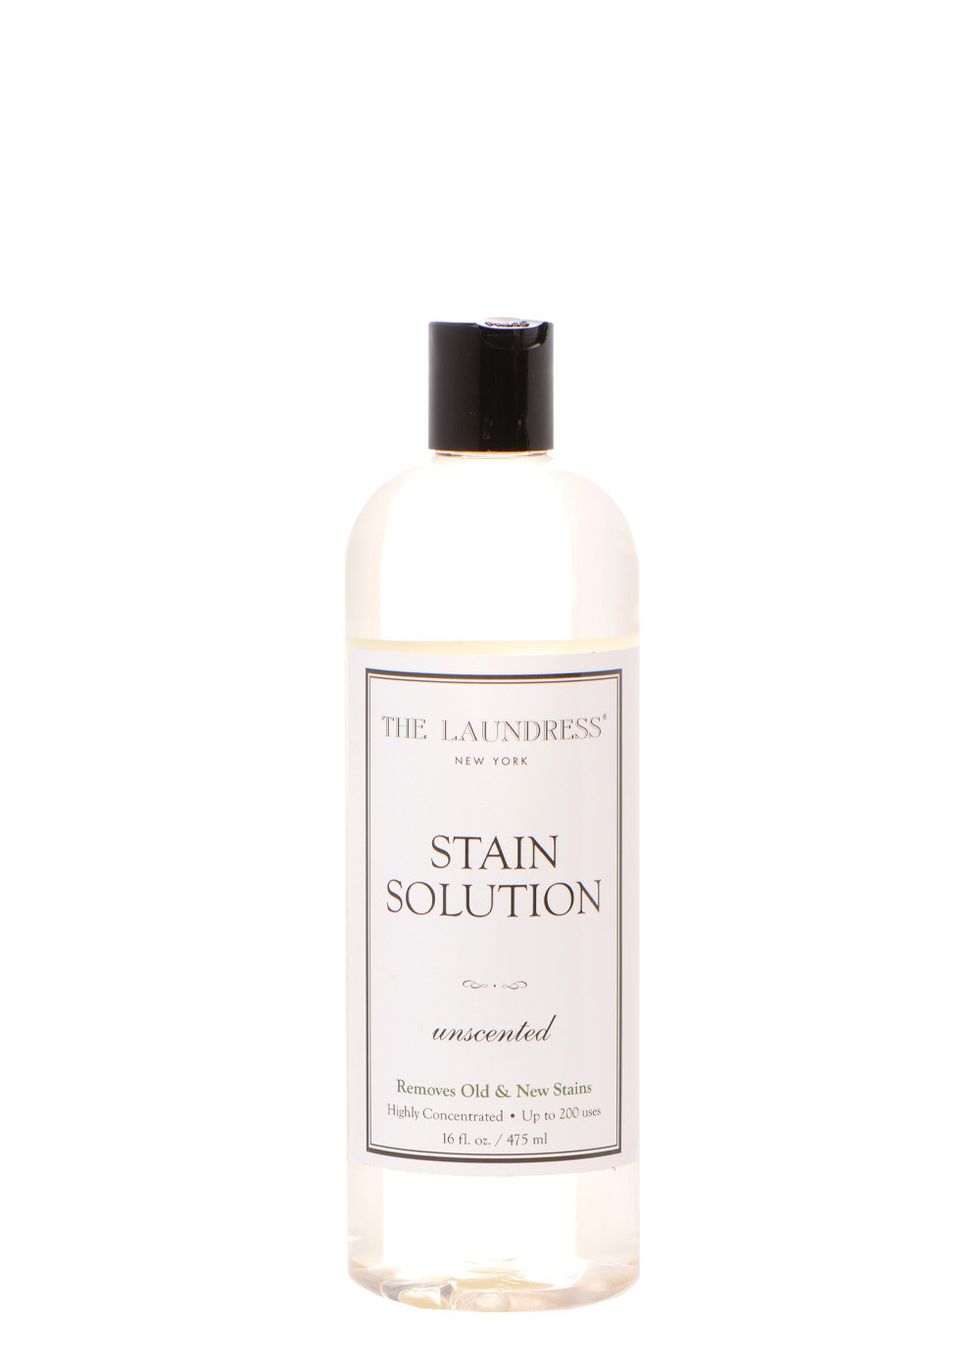 How To Clean Period Stains by Shinesty